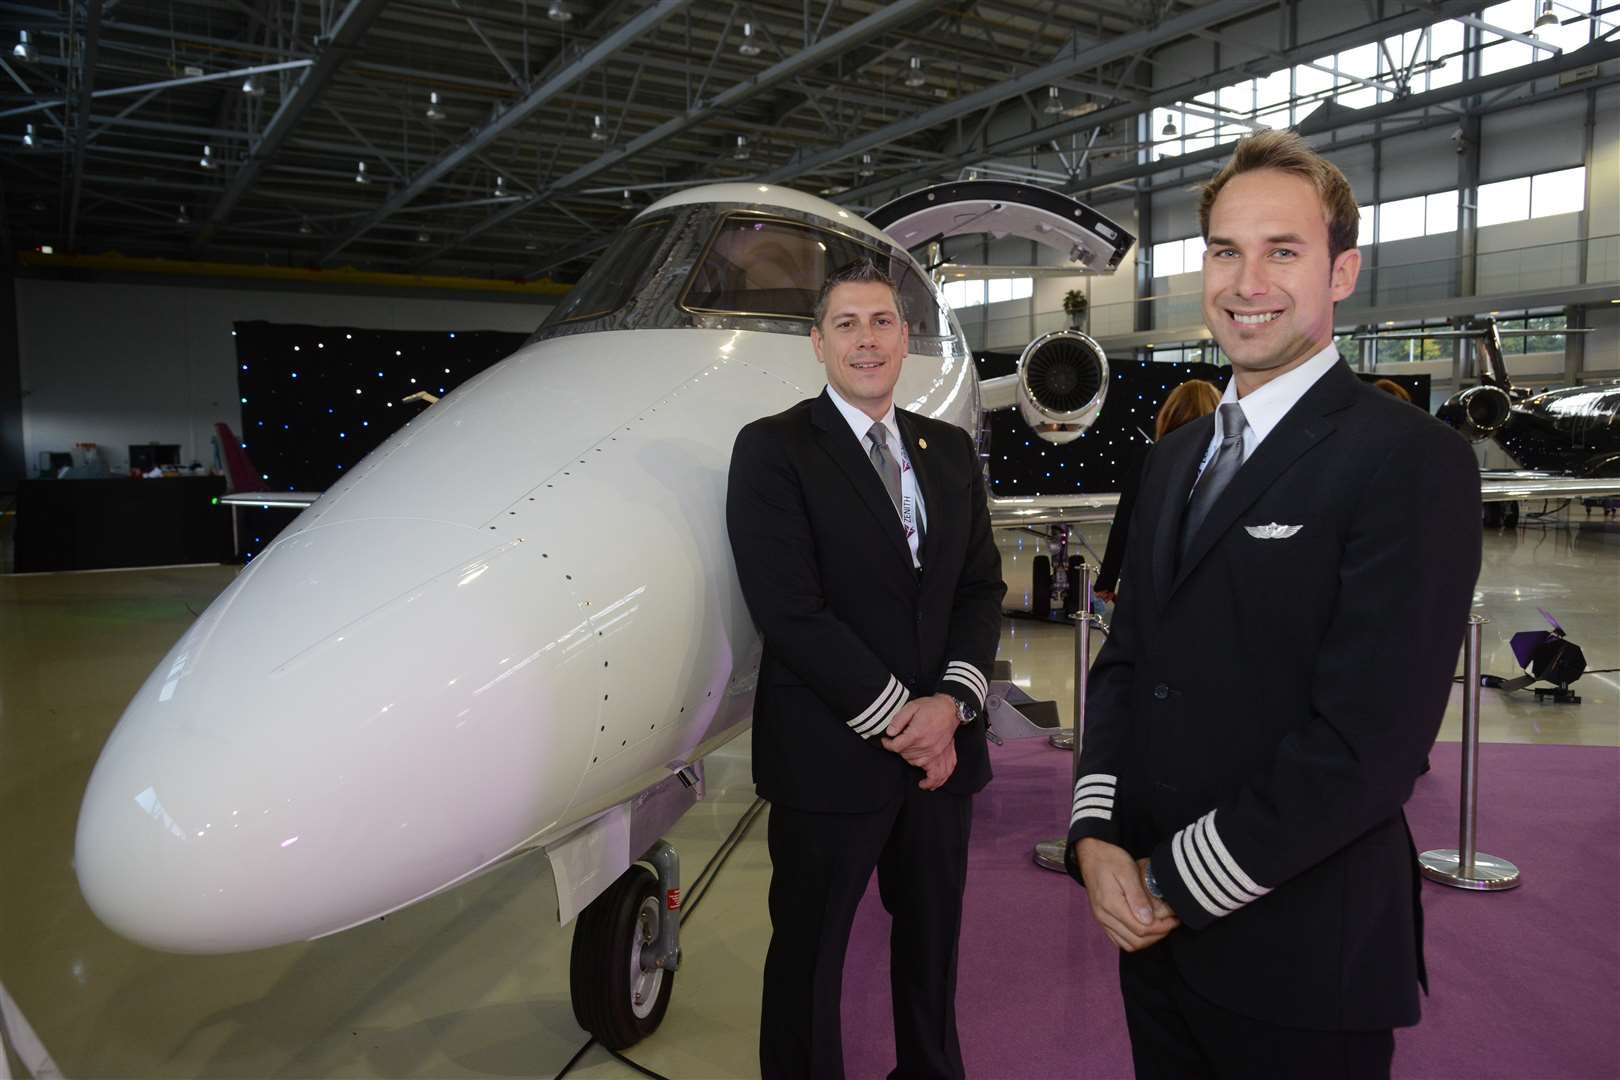 Senior First Officer Mike Imlach and Captain Ben Campbell with the new Learjet 75